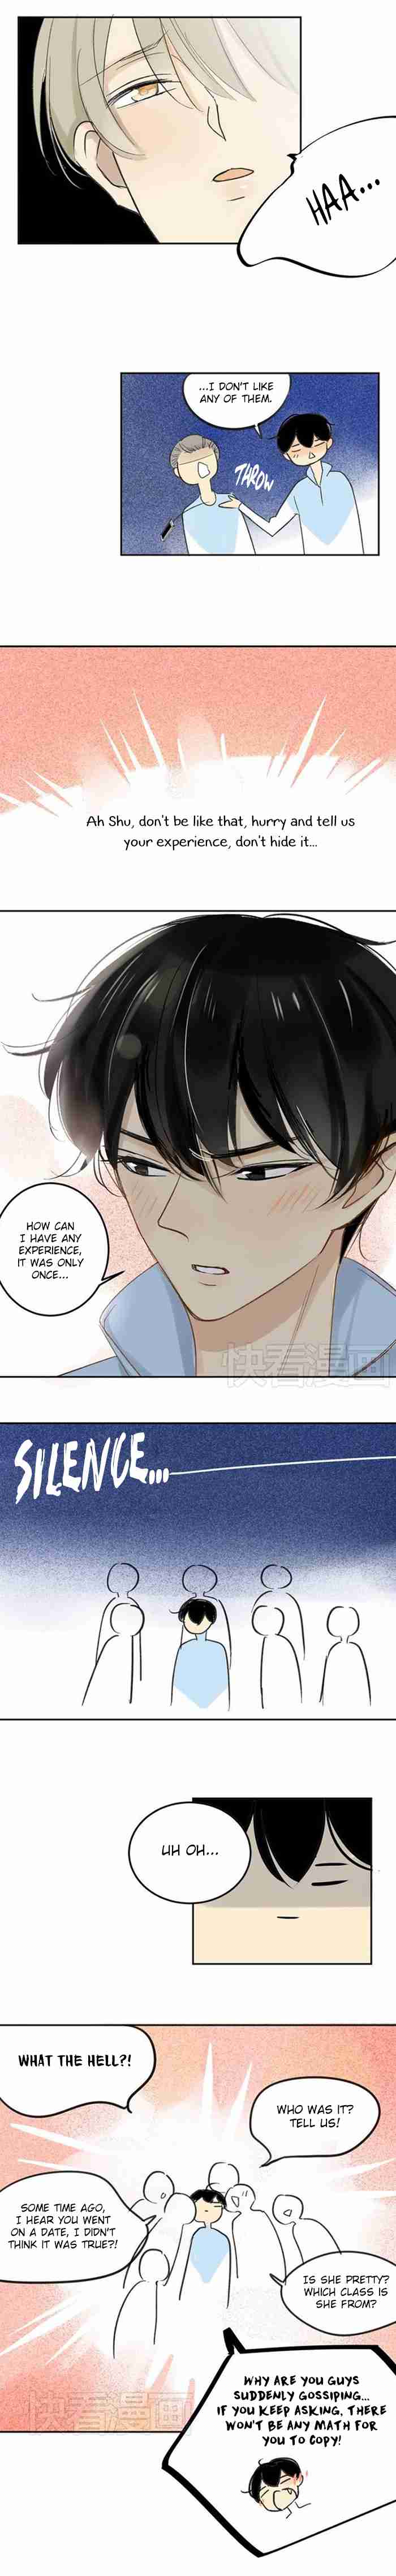 Classmate Relationship? Ch. 68 There's some stuff we need to talk about